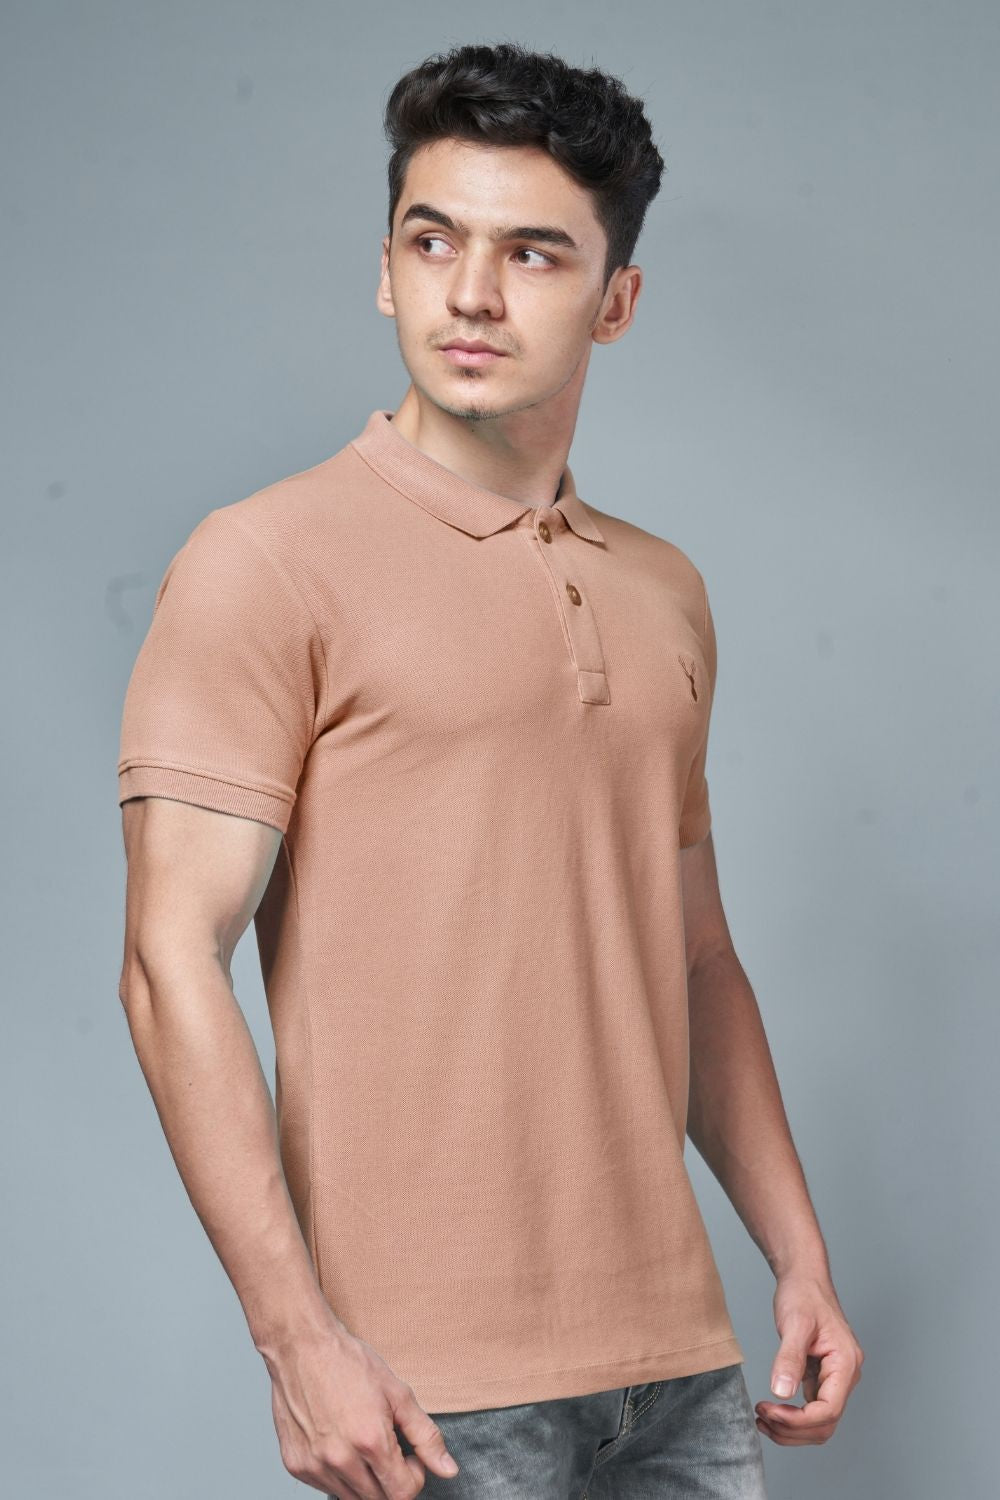 Bisque colored, identity Polo T-shirts for men with collar and half sleeves.